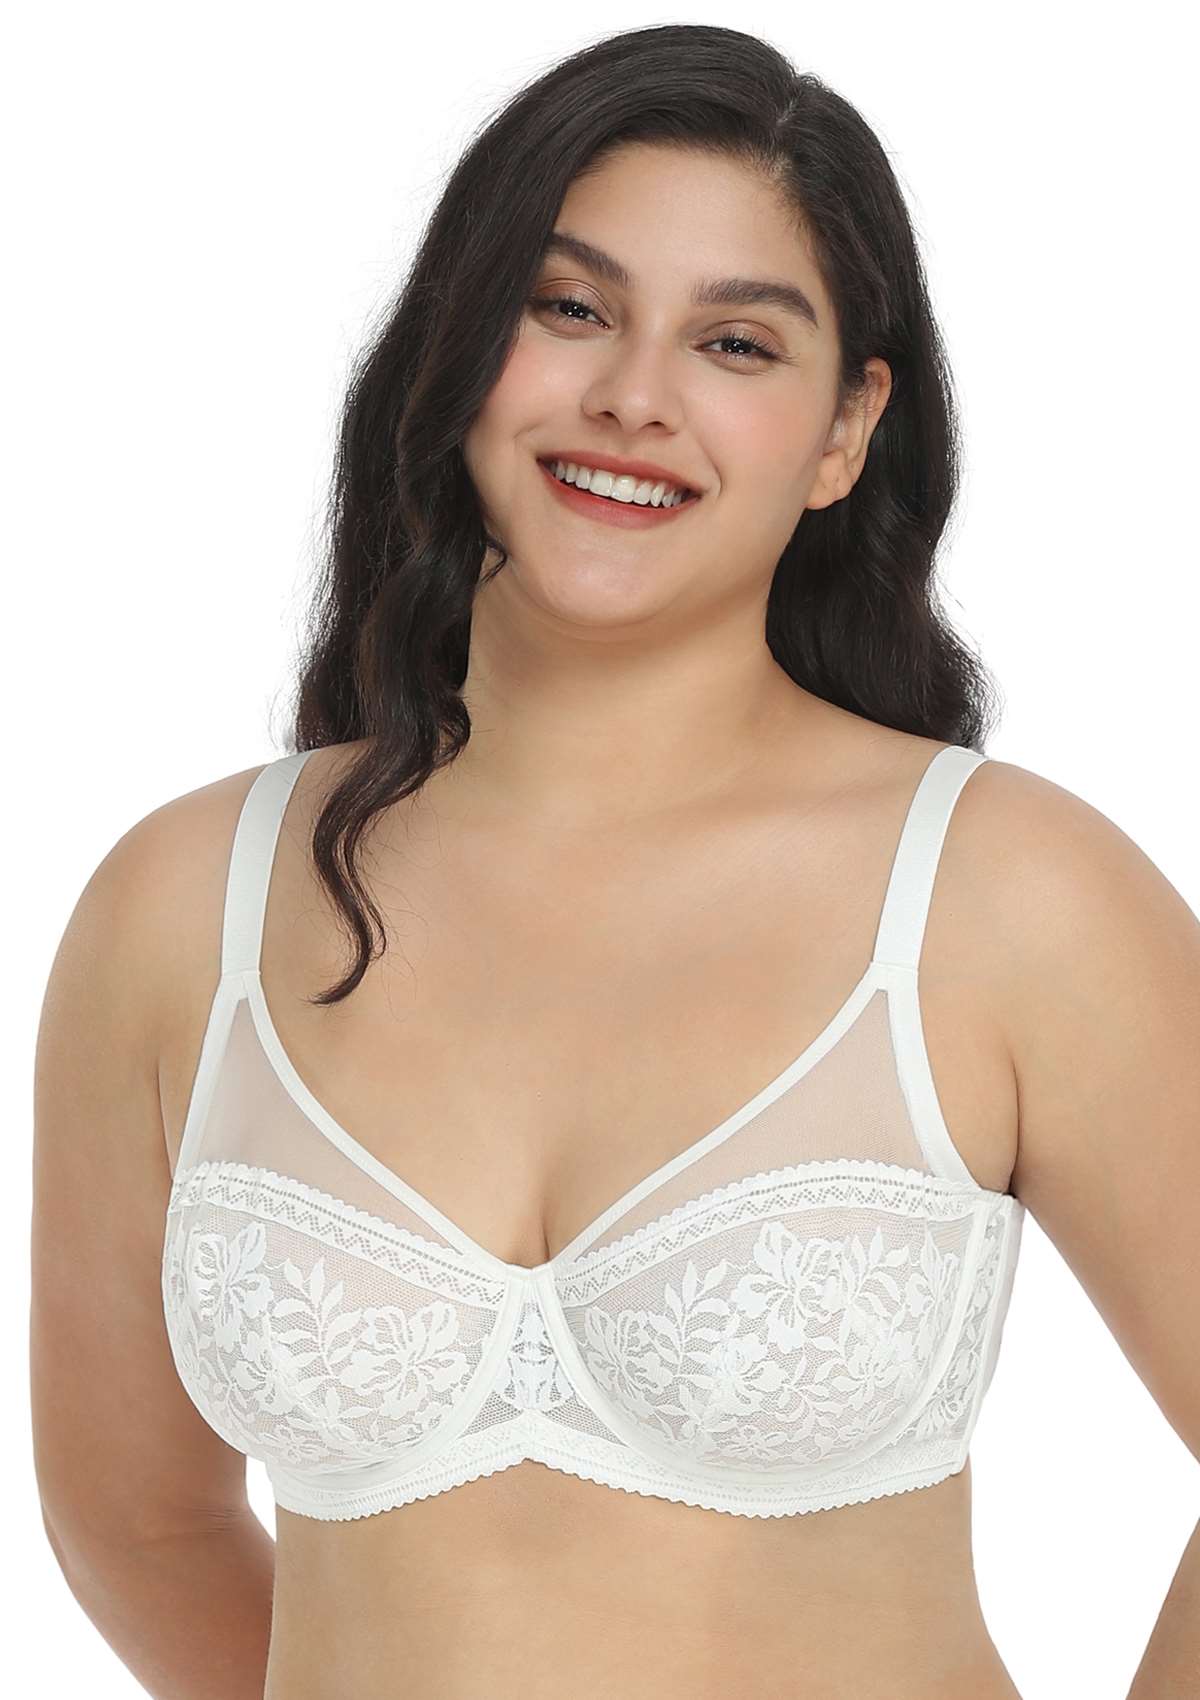 HSIA Gladioli Lace Mesh Minimizing Unlined Underwire Bra For Fuller Busts - White / 36 / H